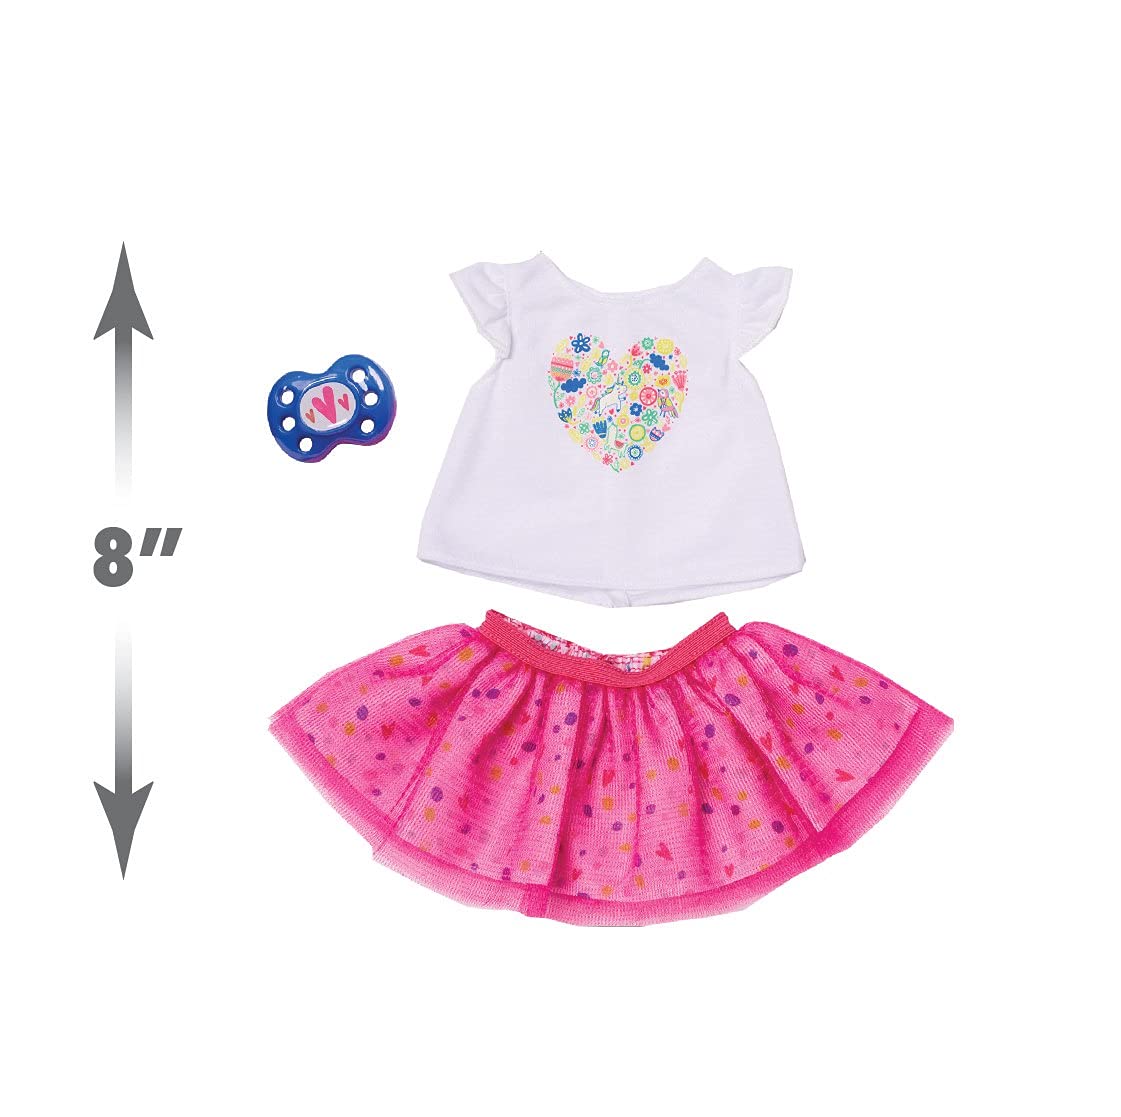 Baby Alive Single Outfit Set, White Tee Pink Tutu, Kids Toys for Ages 3 Up by Just Play